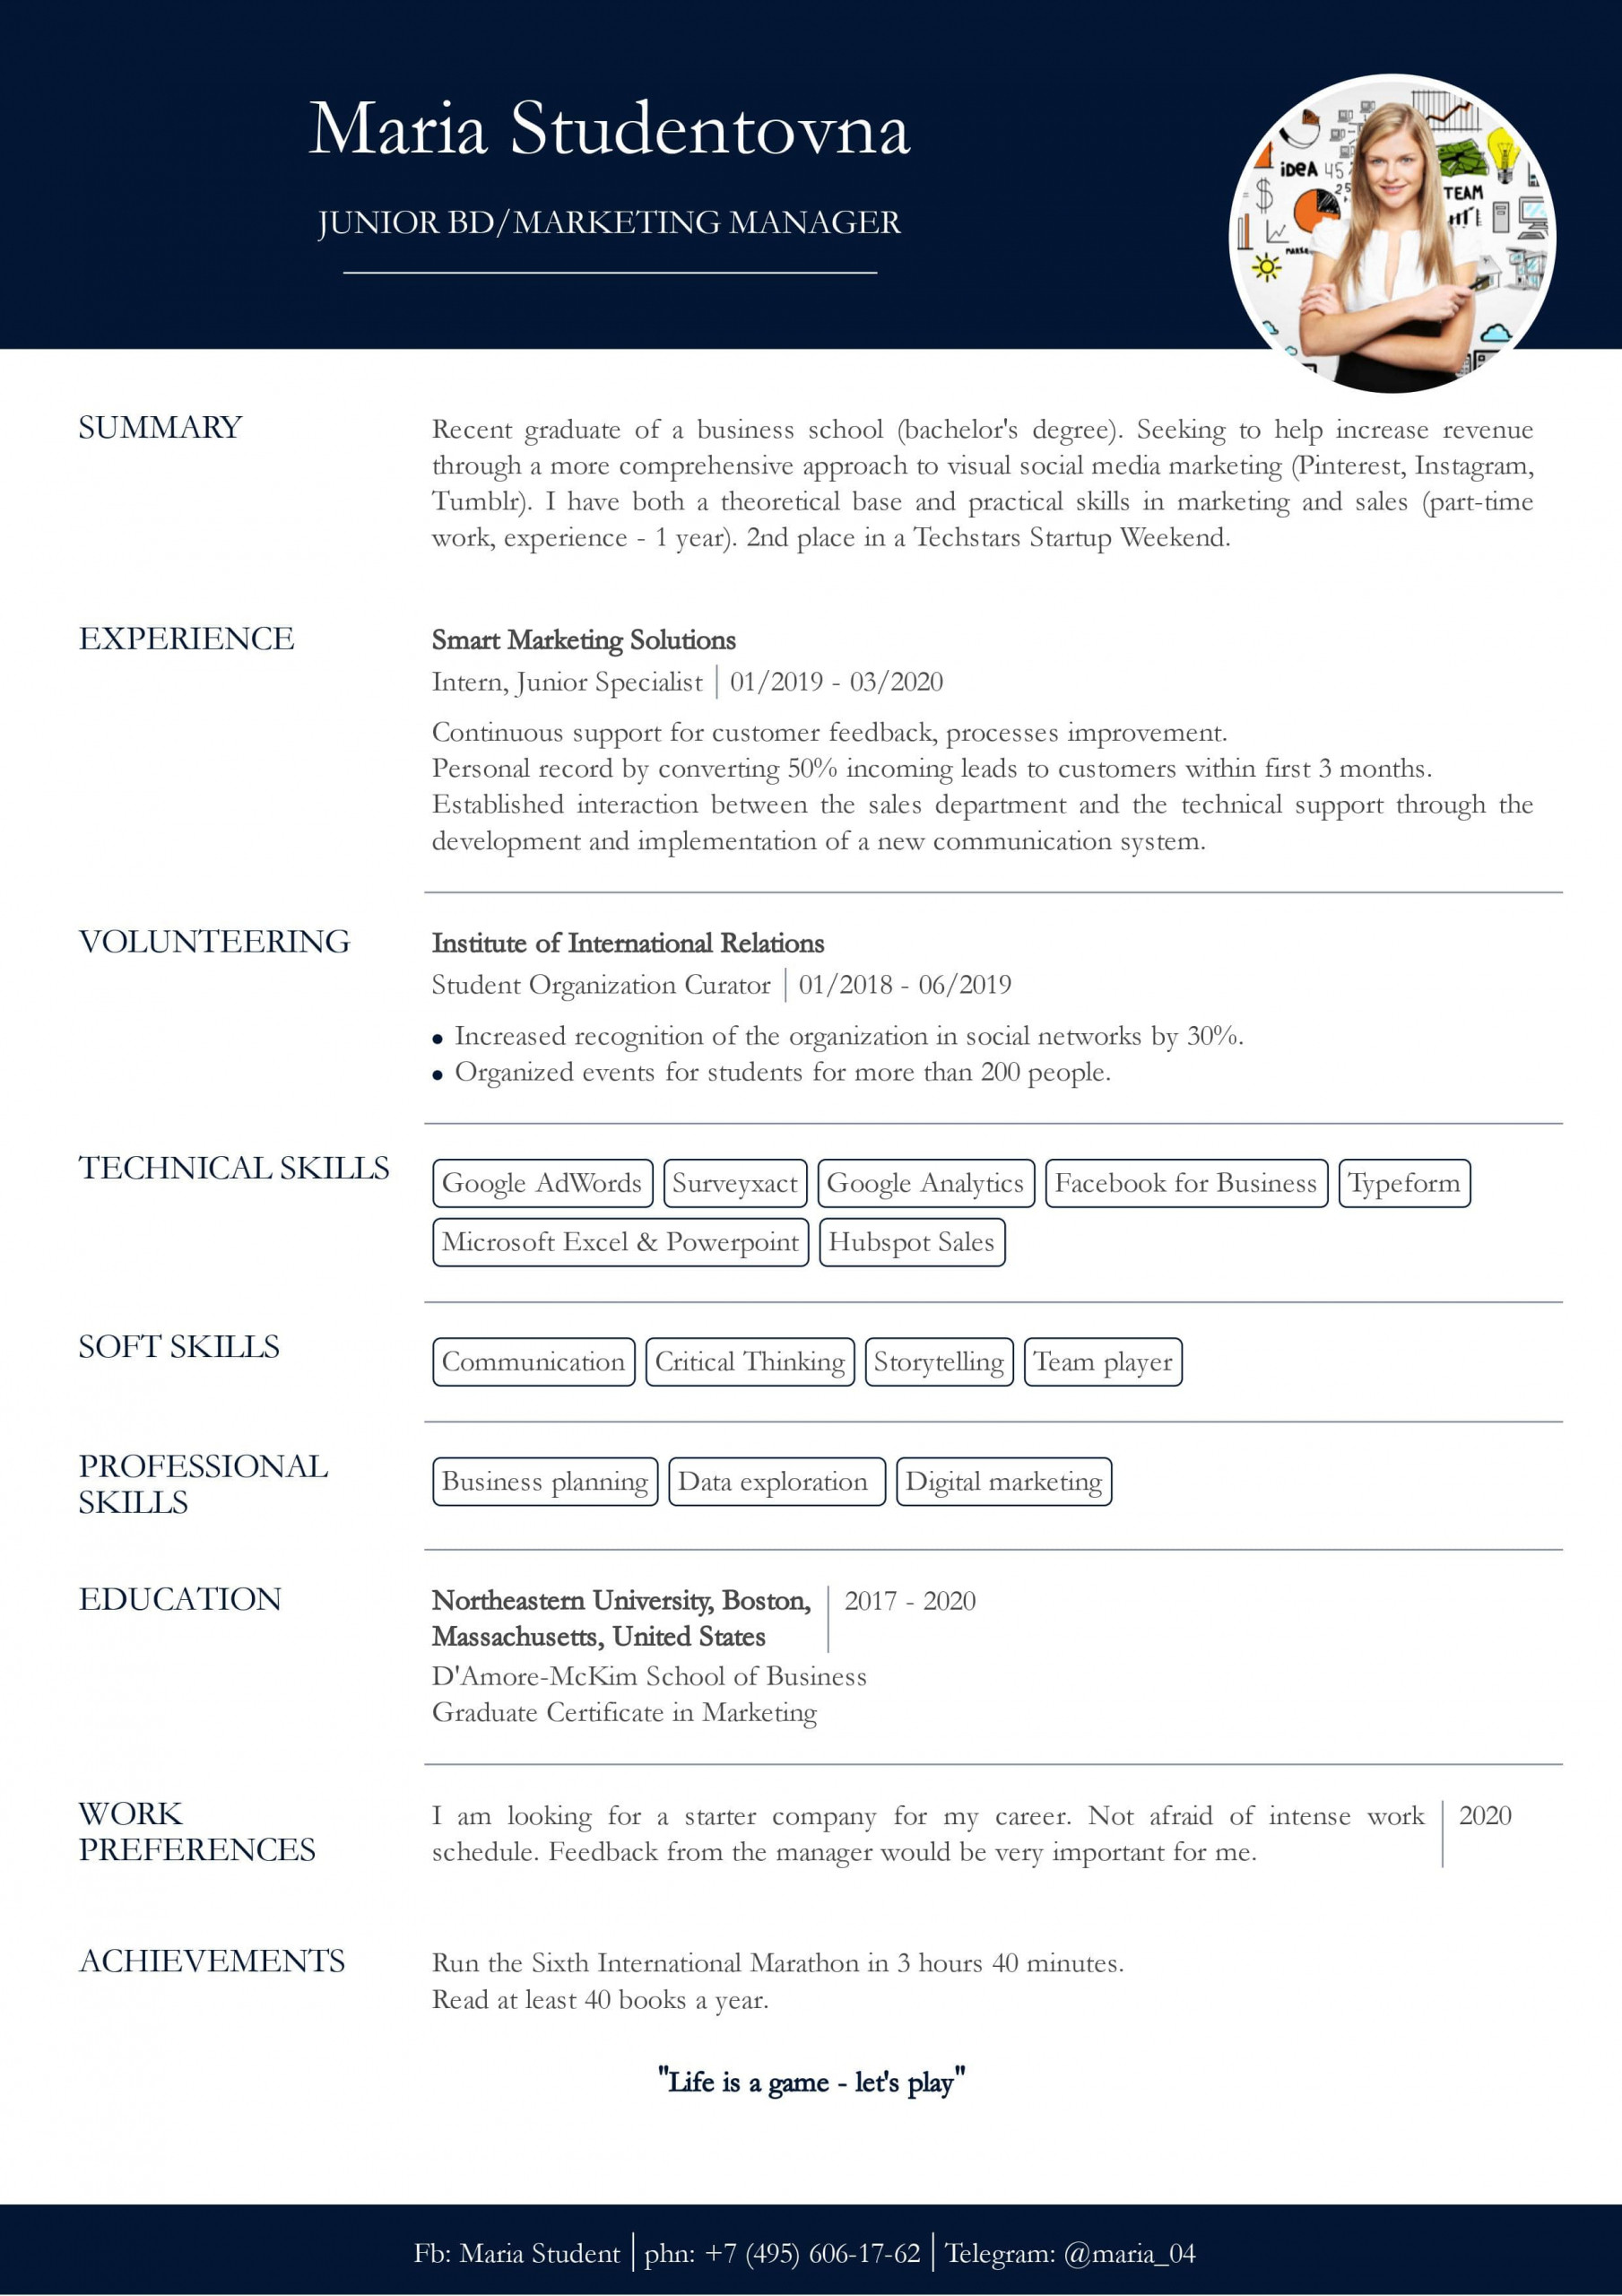 Sample Resume with No College Degree Resume with No Work Experience. Sample for Students. – Cv2you Blog